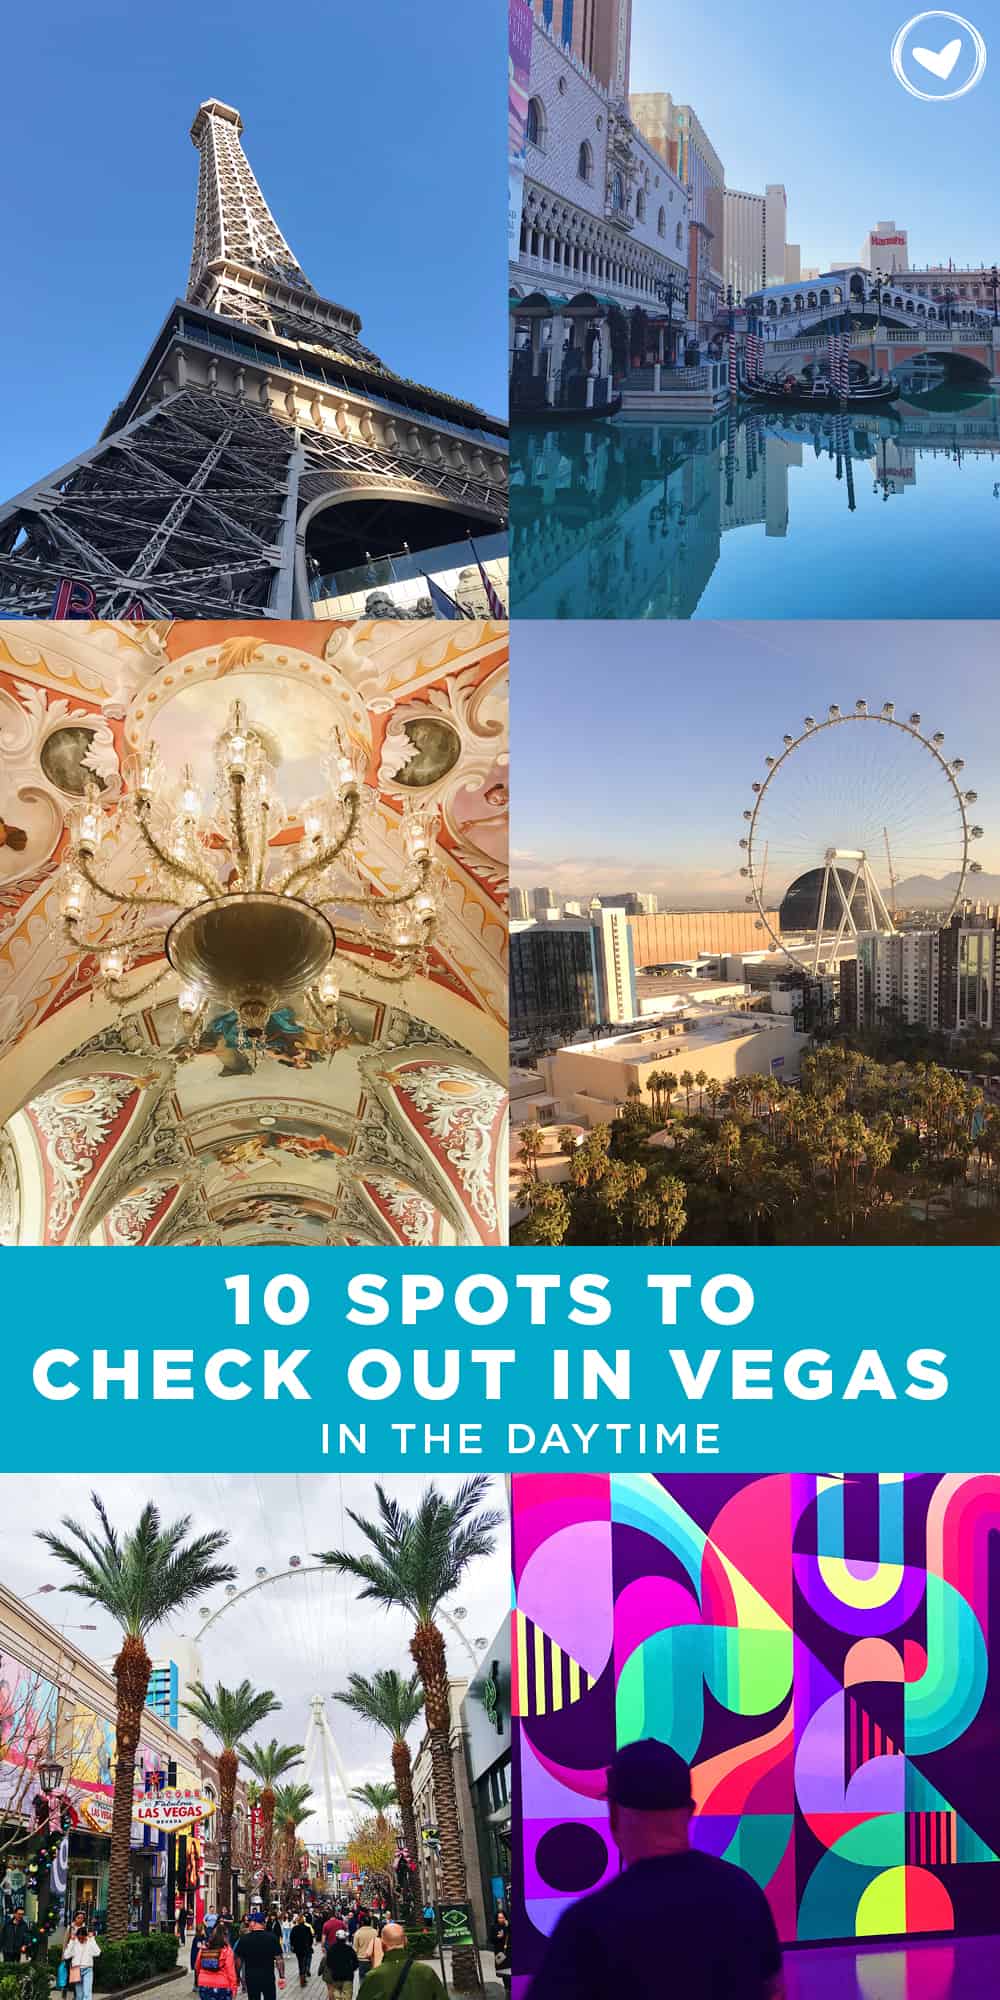 10 Spots to Check Out In Vegas in the Daytime